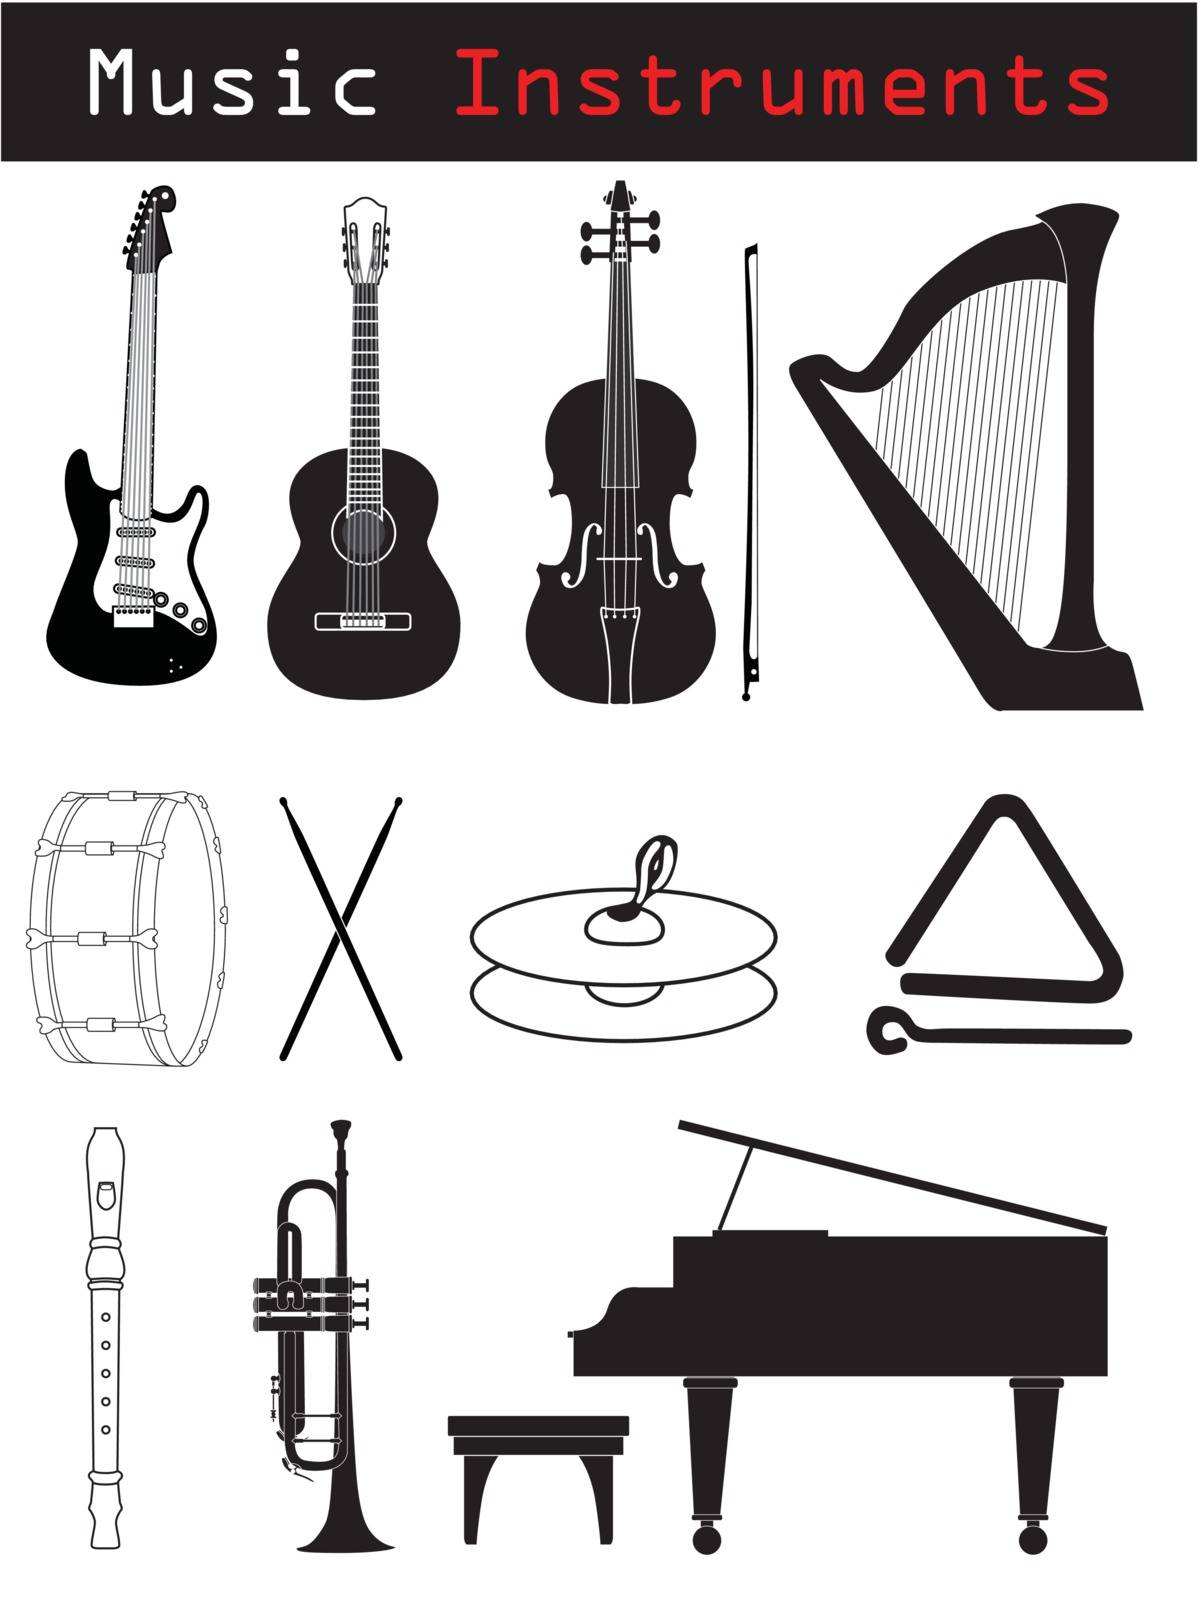 Music Instrument Icons in black and white